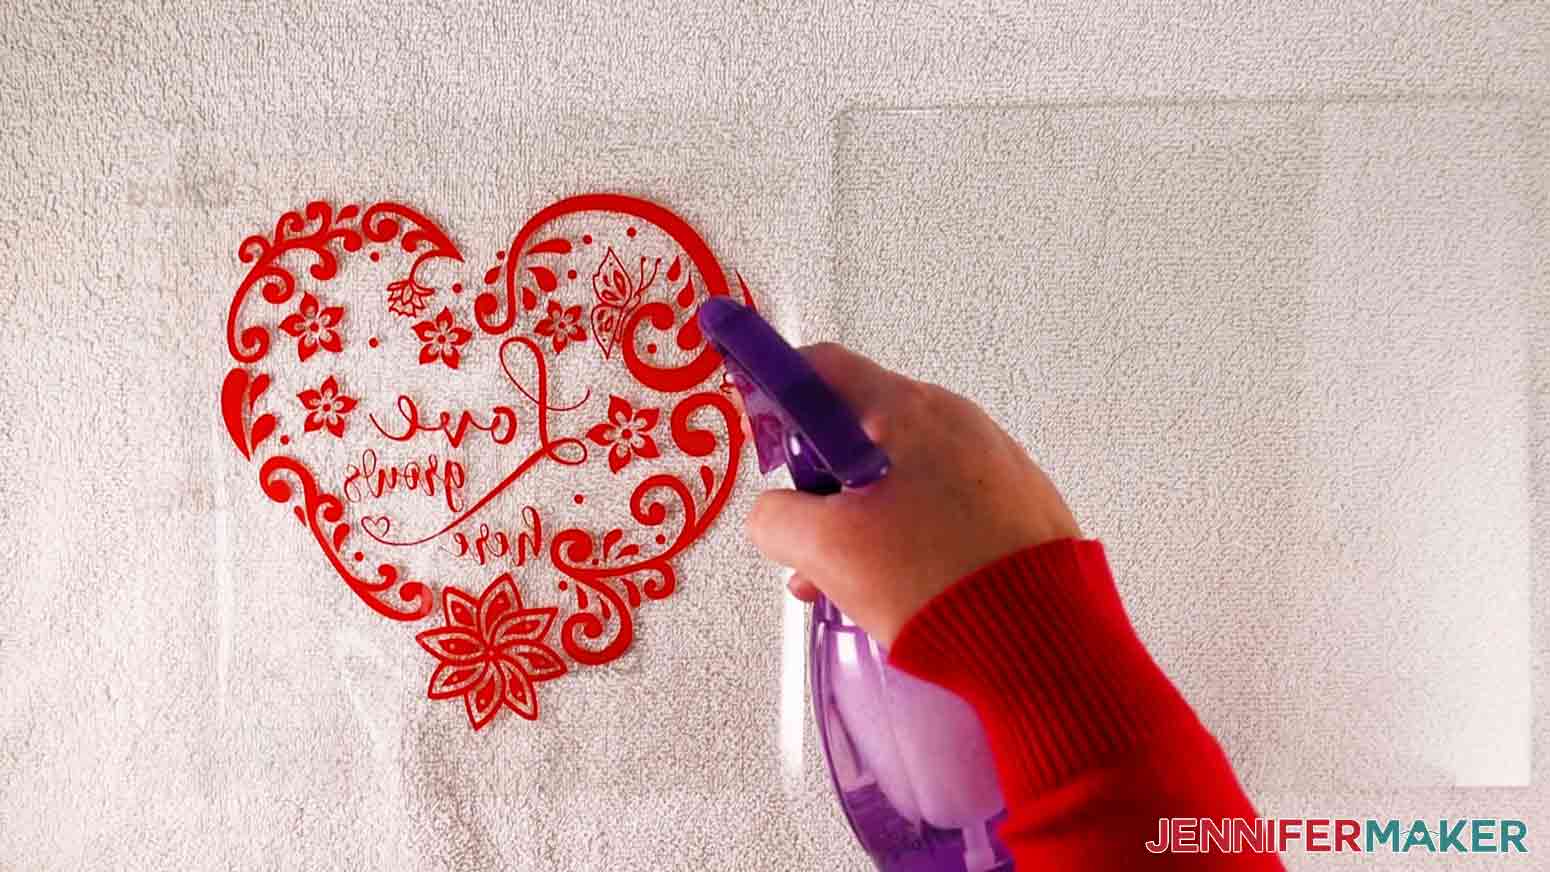 Spray intricate hearts decal and glass with a fine mist